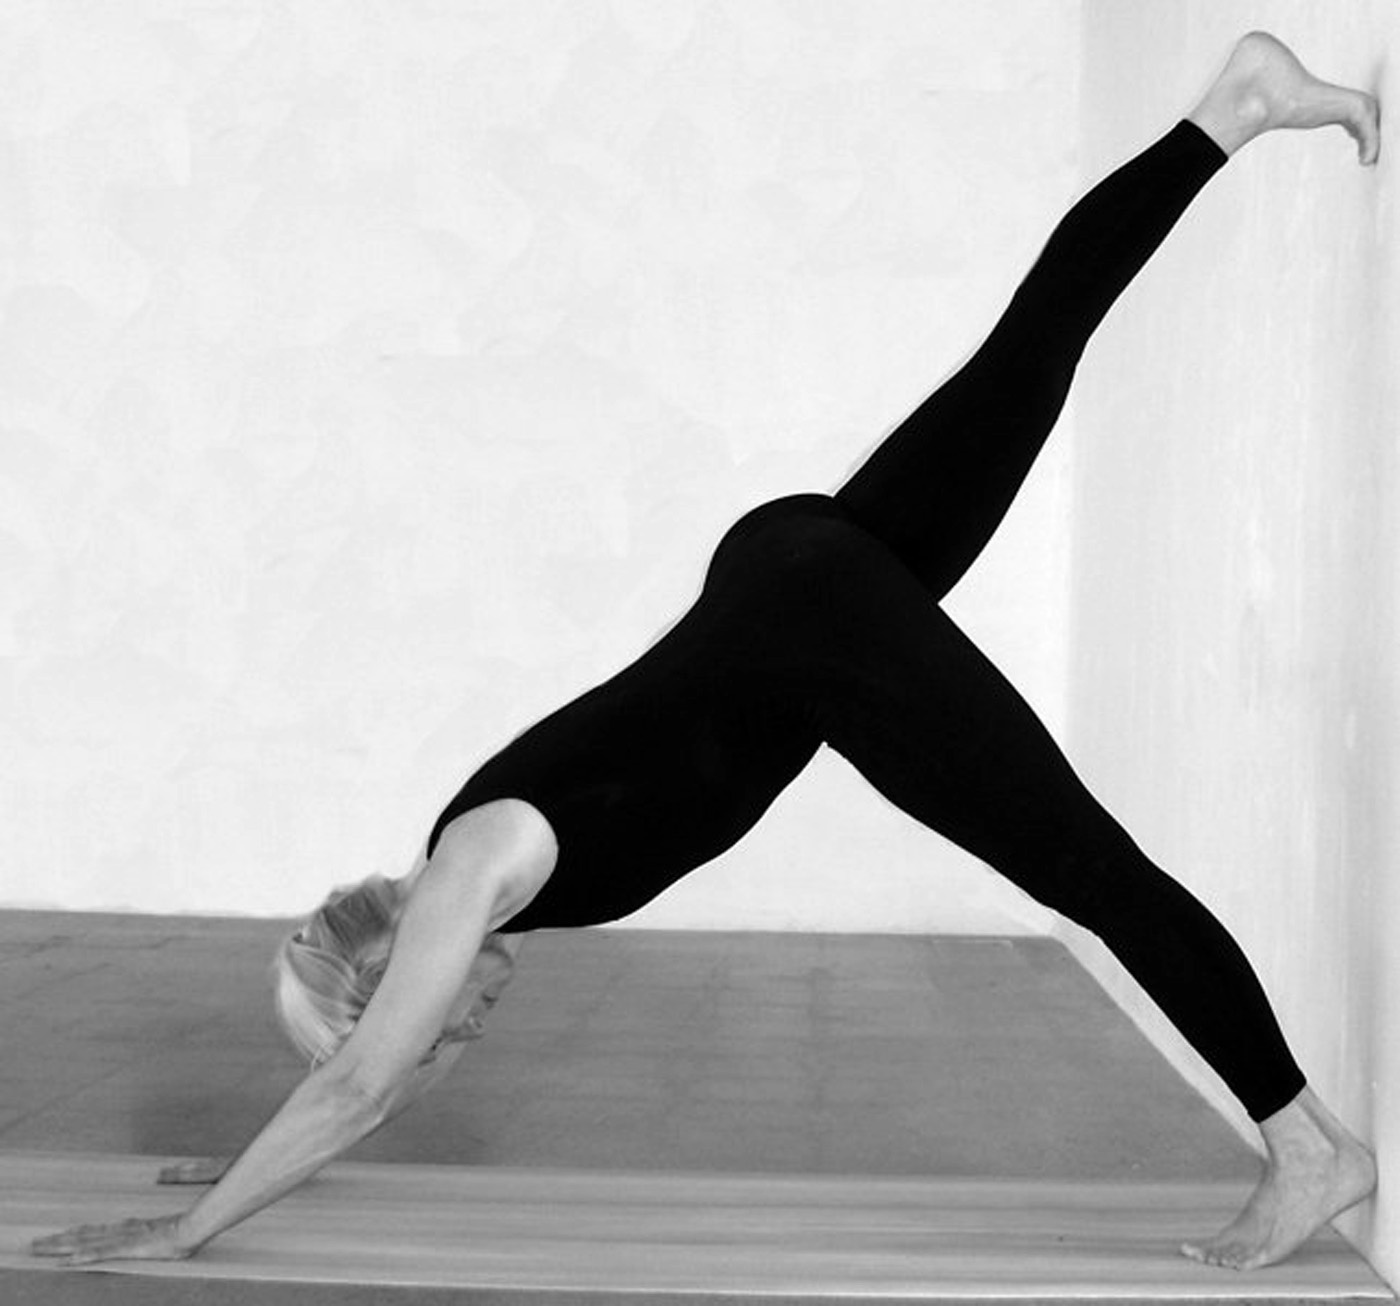 How to Do Legs Up the Wall in Yoga – EverydayYoga.com